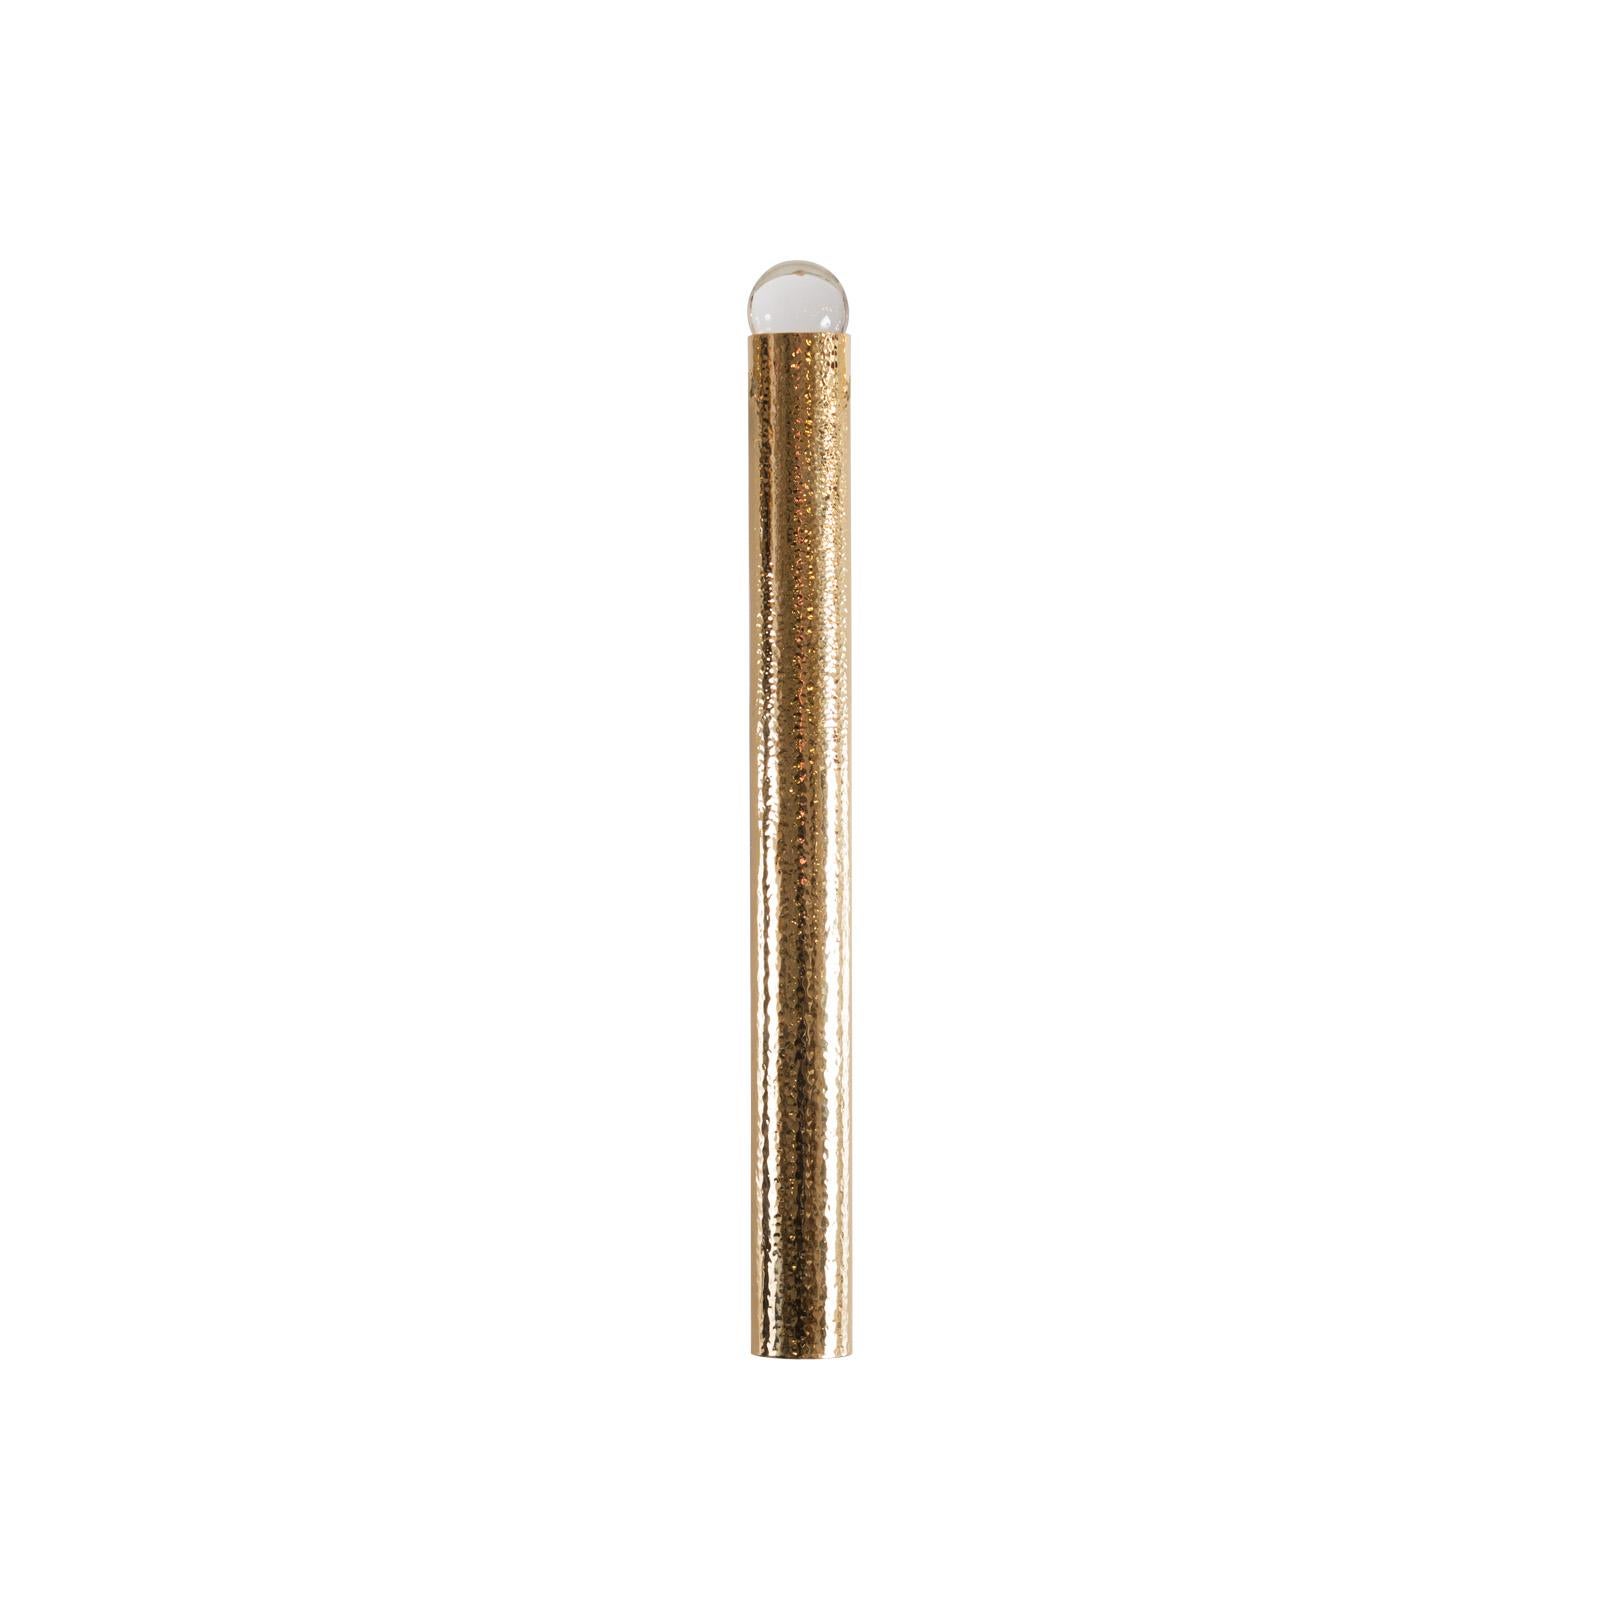 Artistical hammered brass-tube with a Crystal-ball - can also be mounted the other way round.

Most components according to the UL regulations, with an additional charge we will UL-list and label our fixtures.